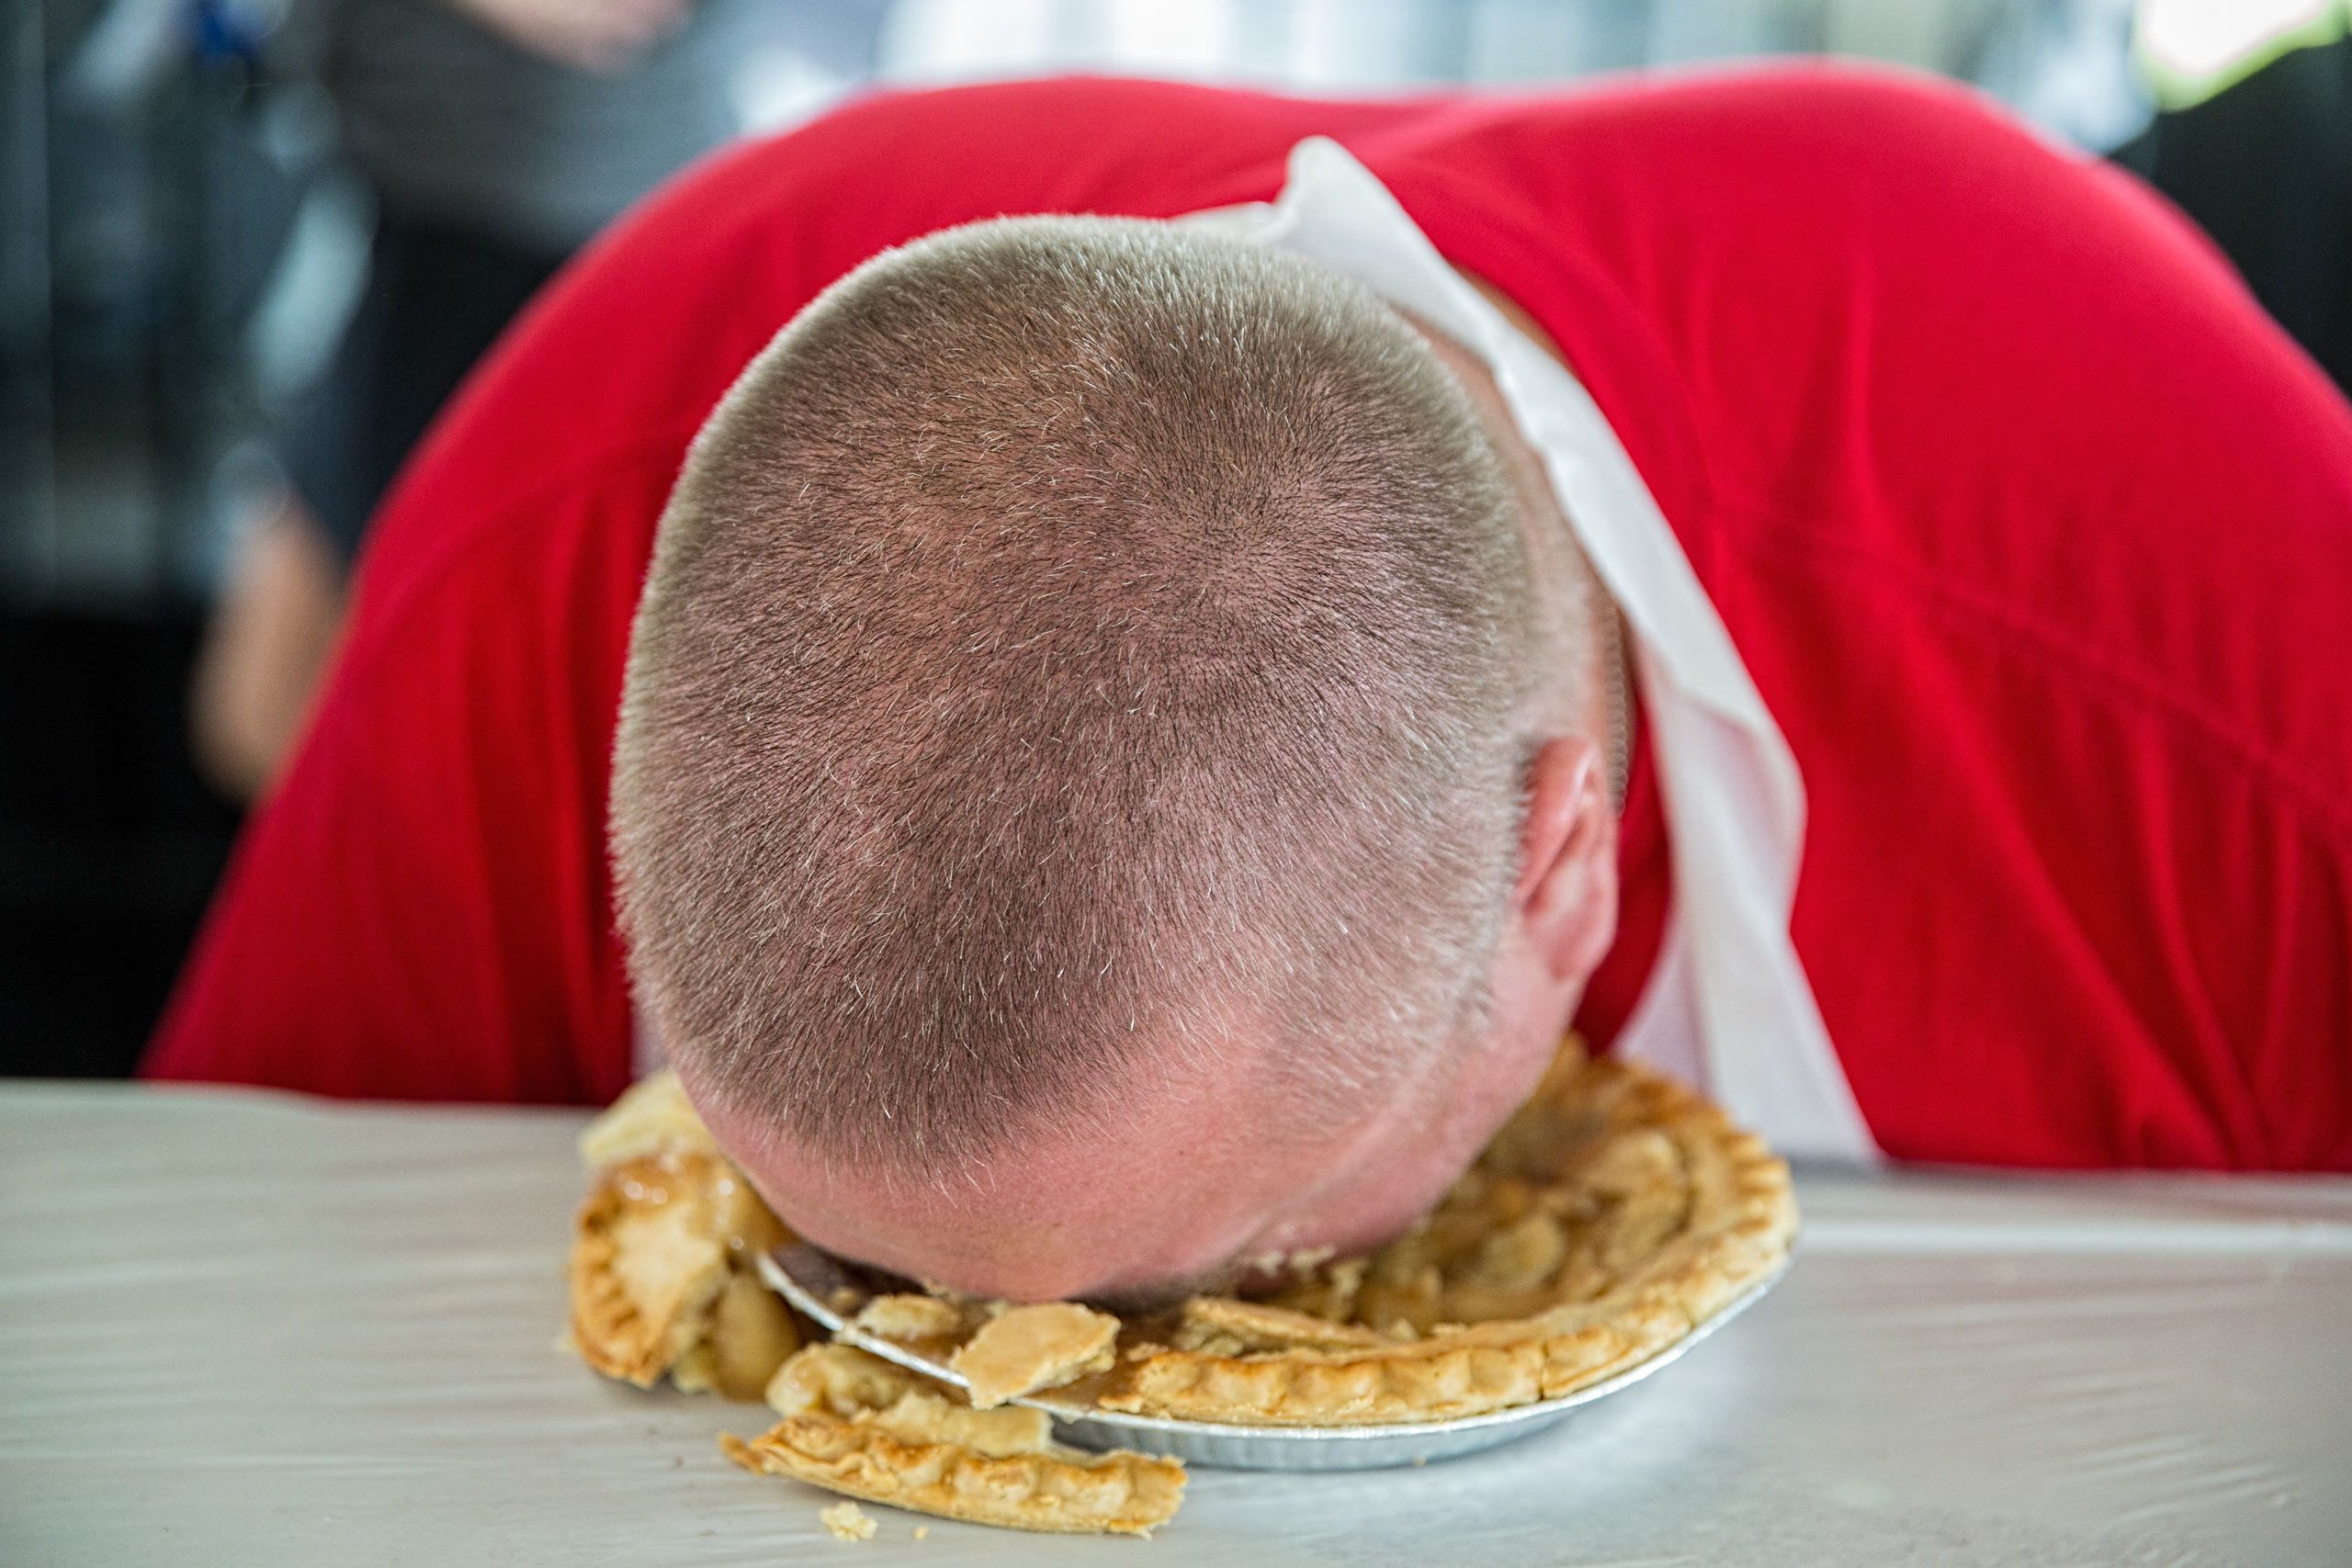 Man With His Head in a Pie